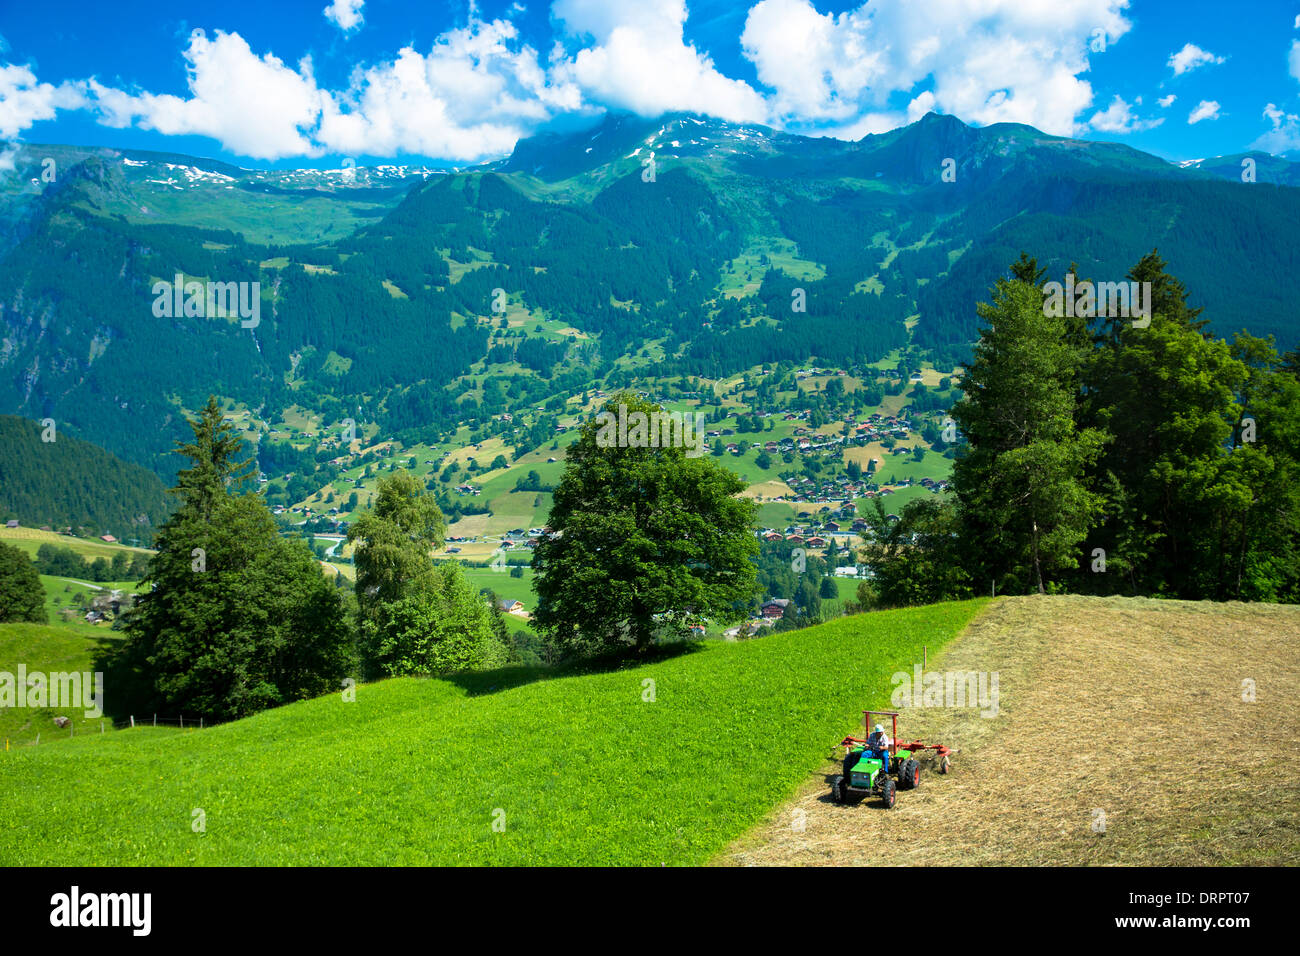 Switzerland Bern Grindelwald Farm In High Resolution Stock Photography and  Images - Alamy